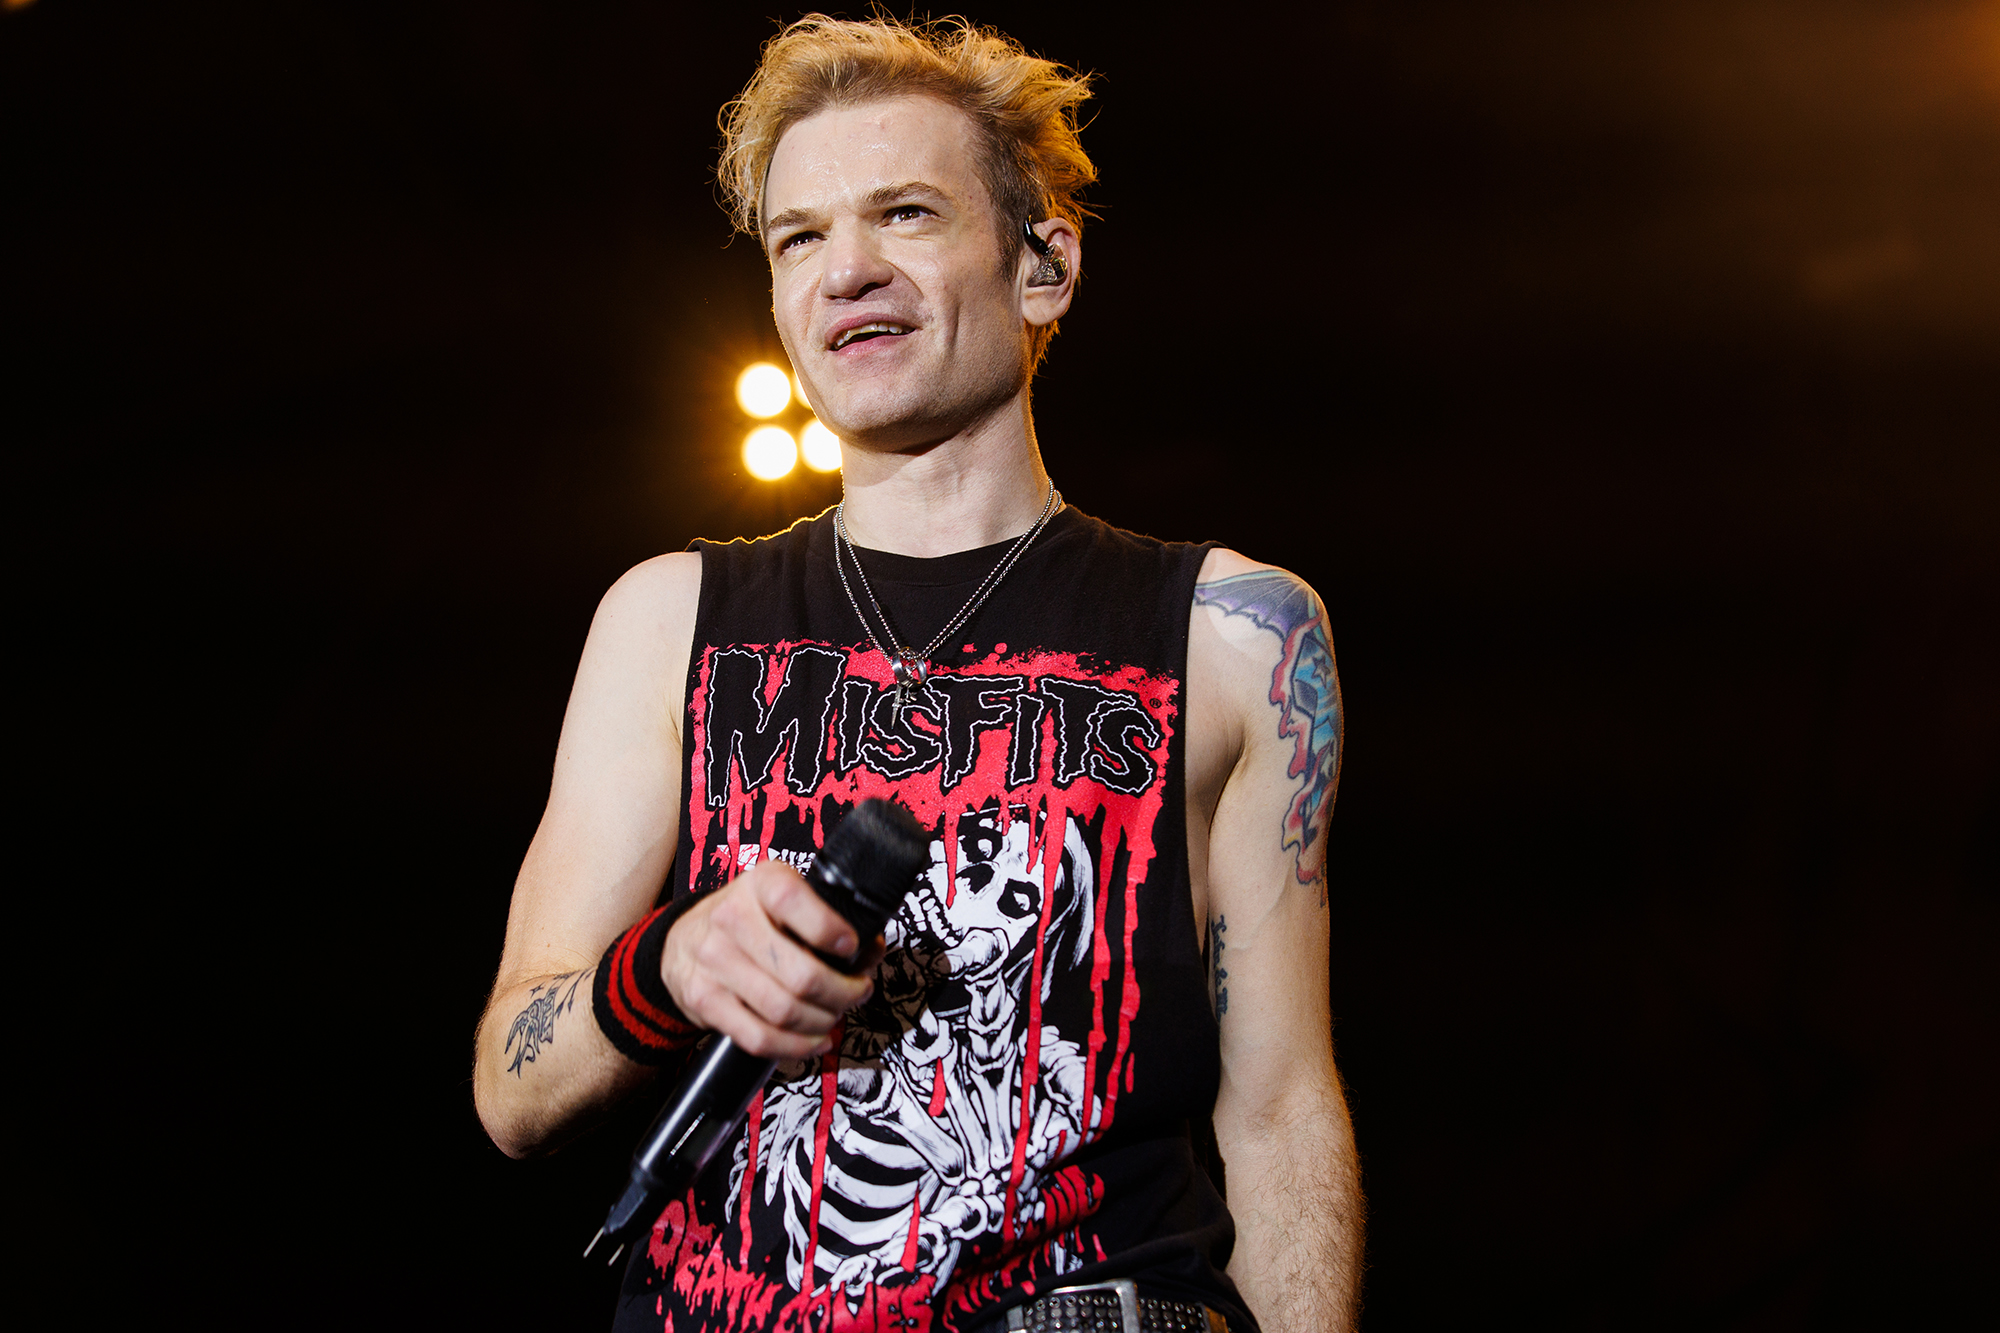 Sum 41 Singer Deryck Whibley Discharged From Hospital, Wife Ari Says